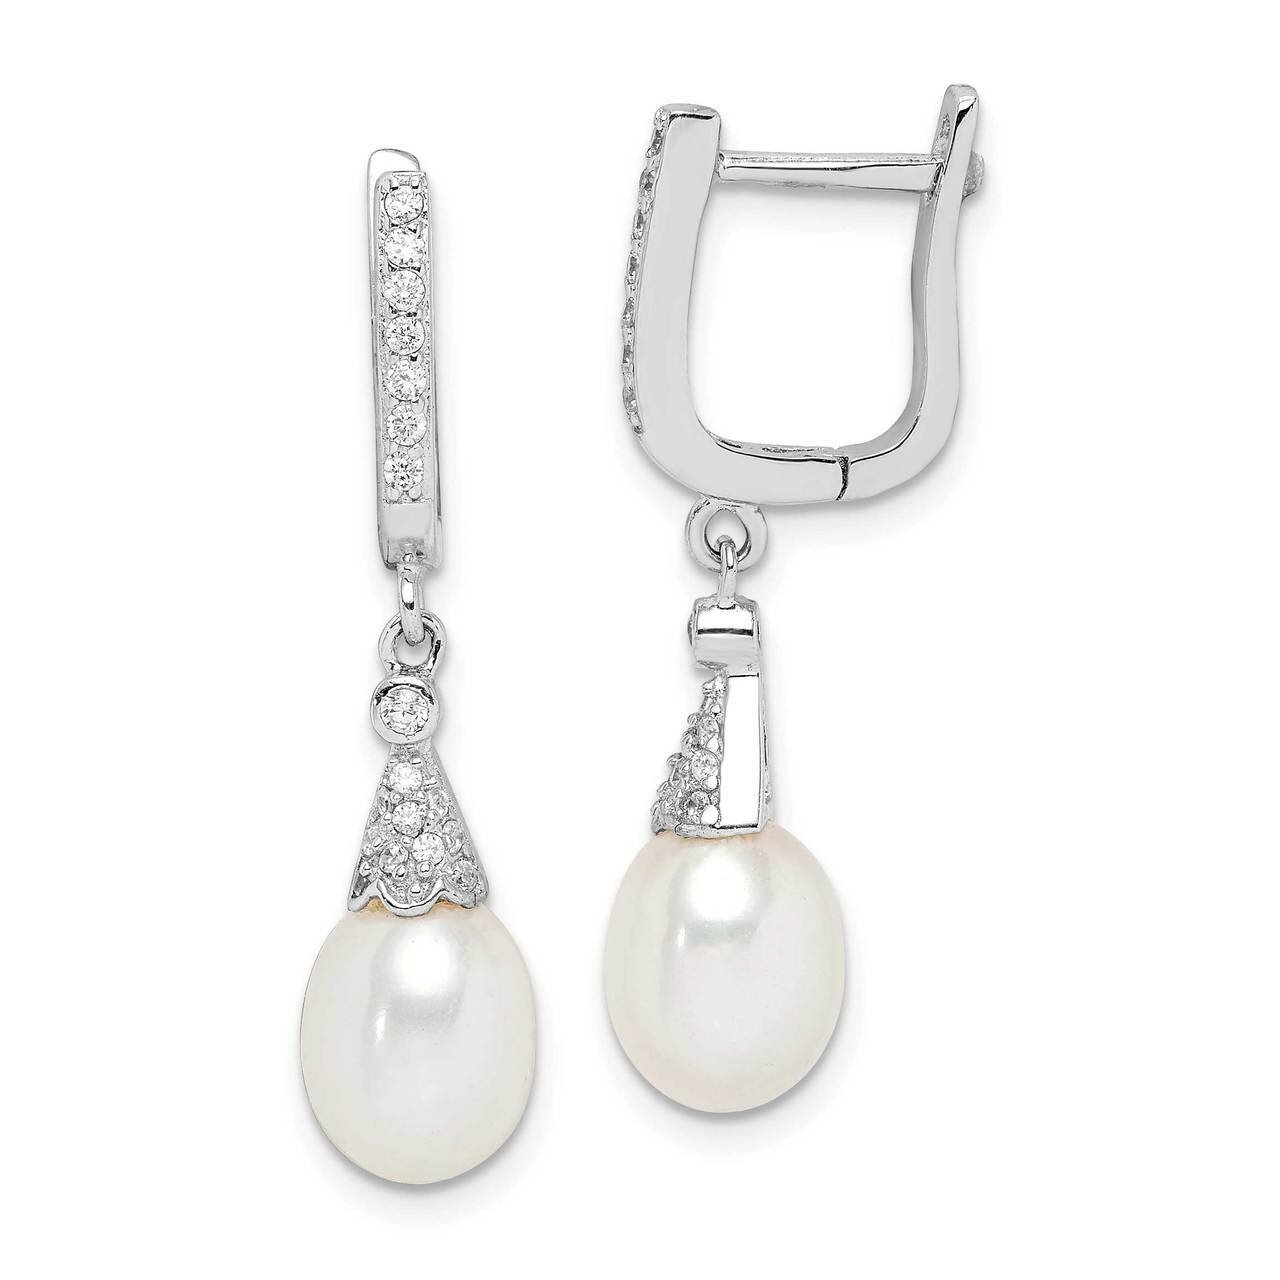 7-8mm White Rice Freshwater Cultured Pearl CZ Diamond Earrings Sterling Silver Rhodium Plated QE15200